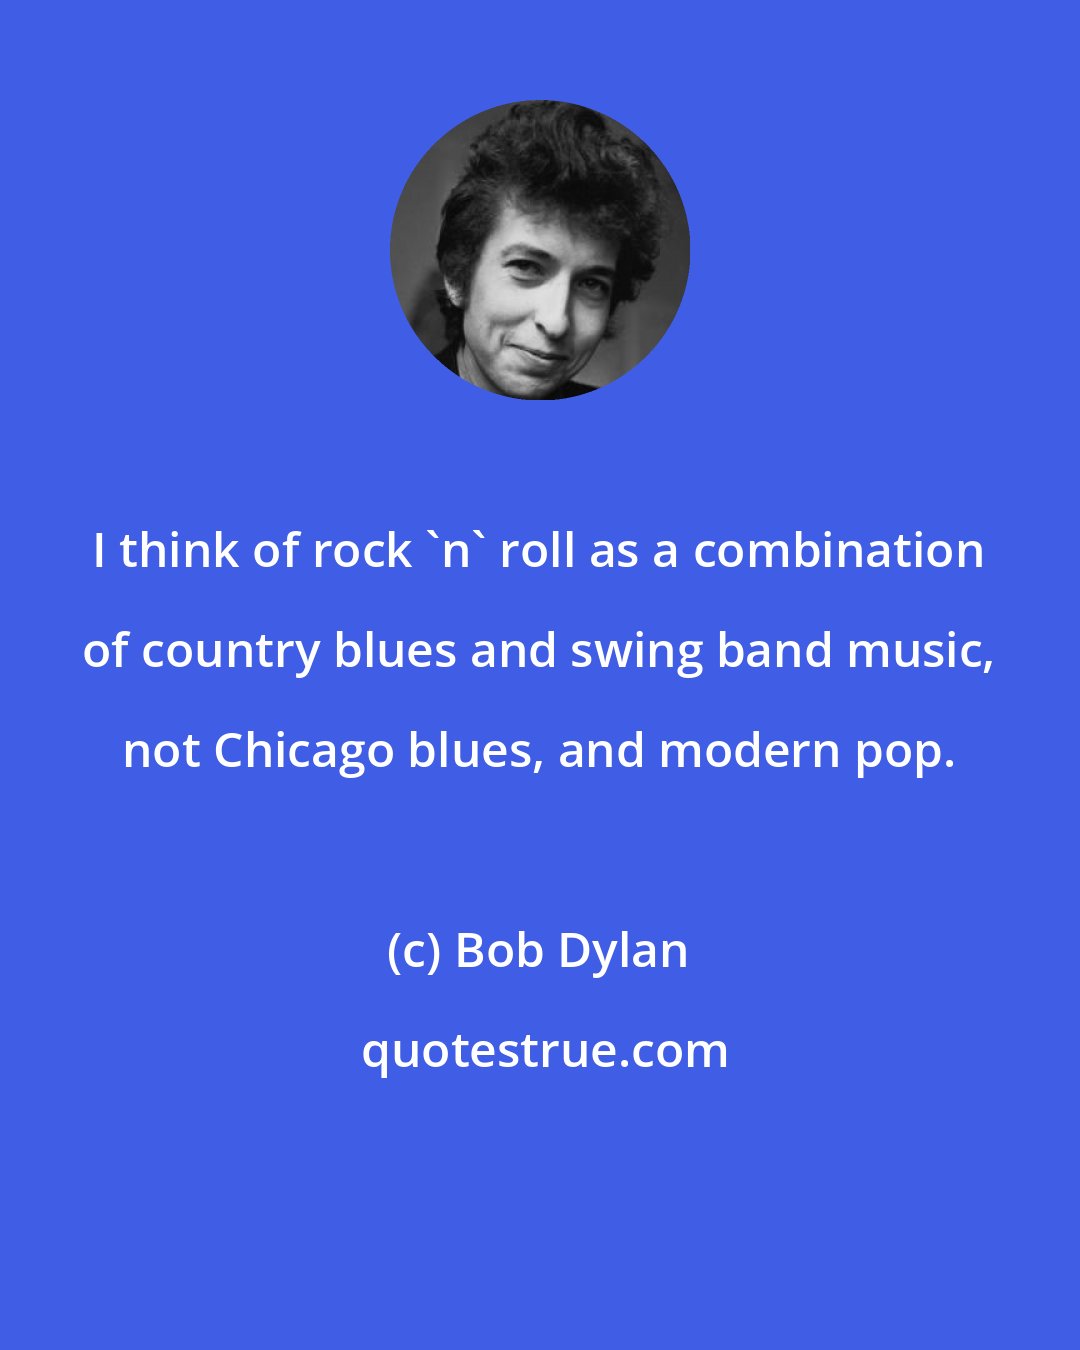 Bob Dylan: I think of rock 'n' roll as a combination of country blues and swing band music, not Chicago blues, and modern pop.